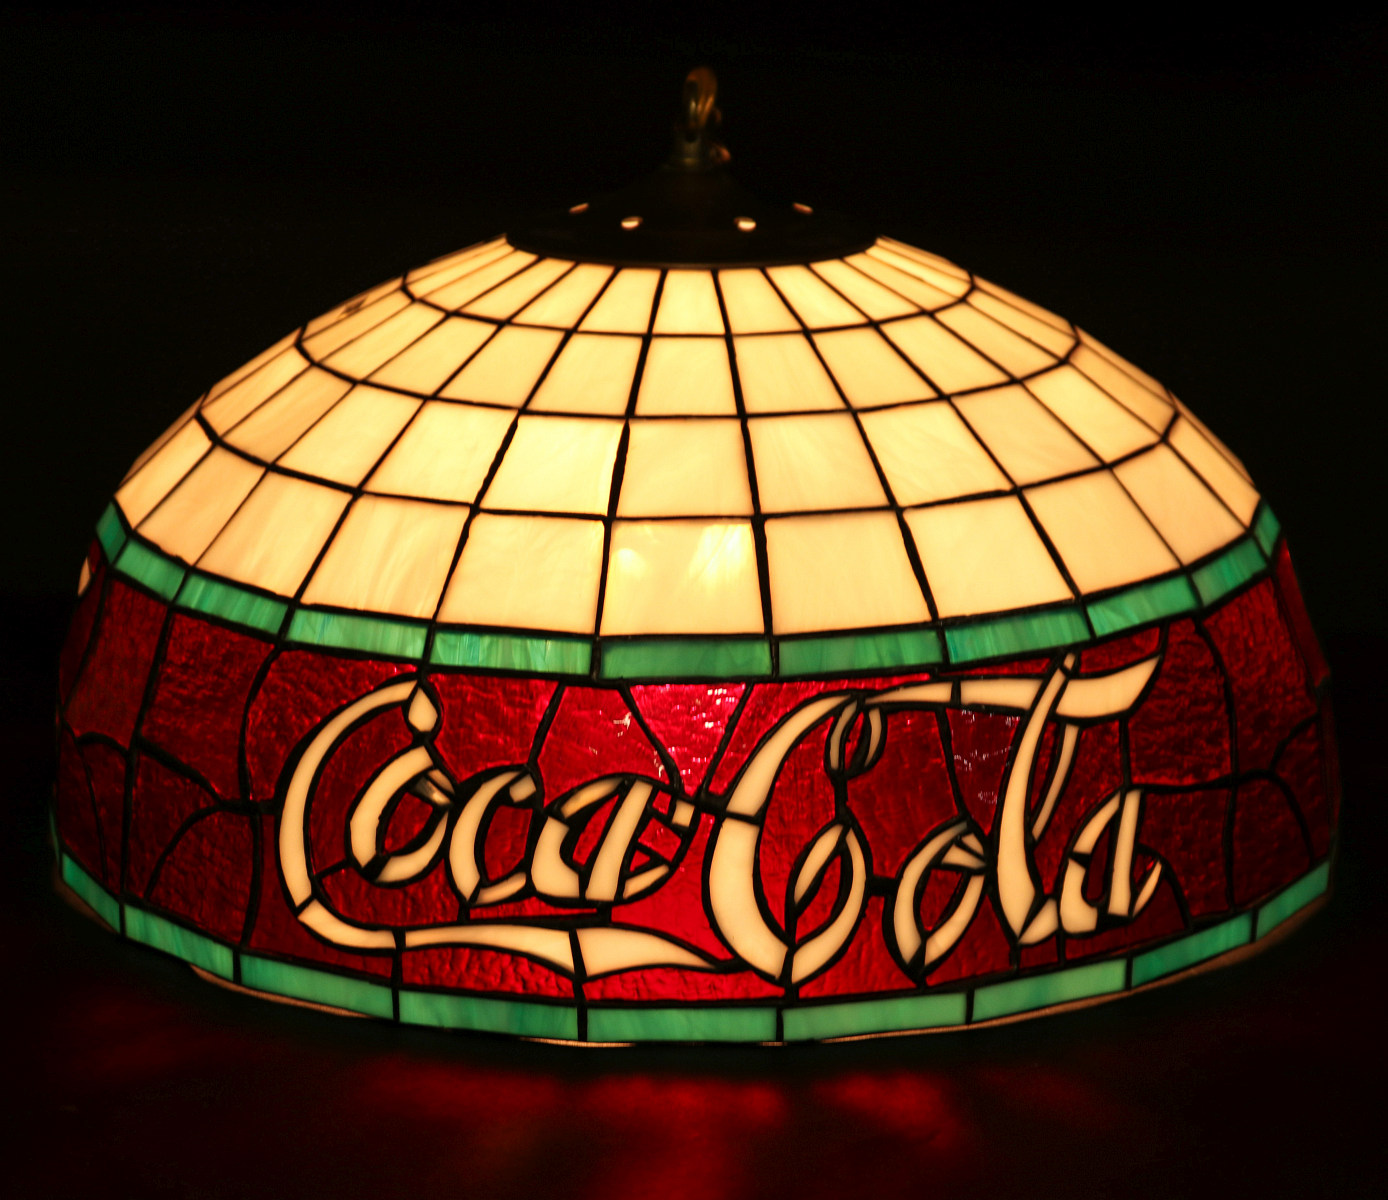 A LATE 20TH CENTURY COCA-COLA ADVERTISING LEADED LIGHT